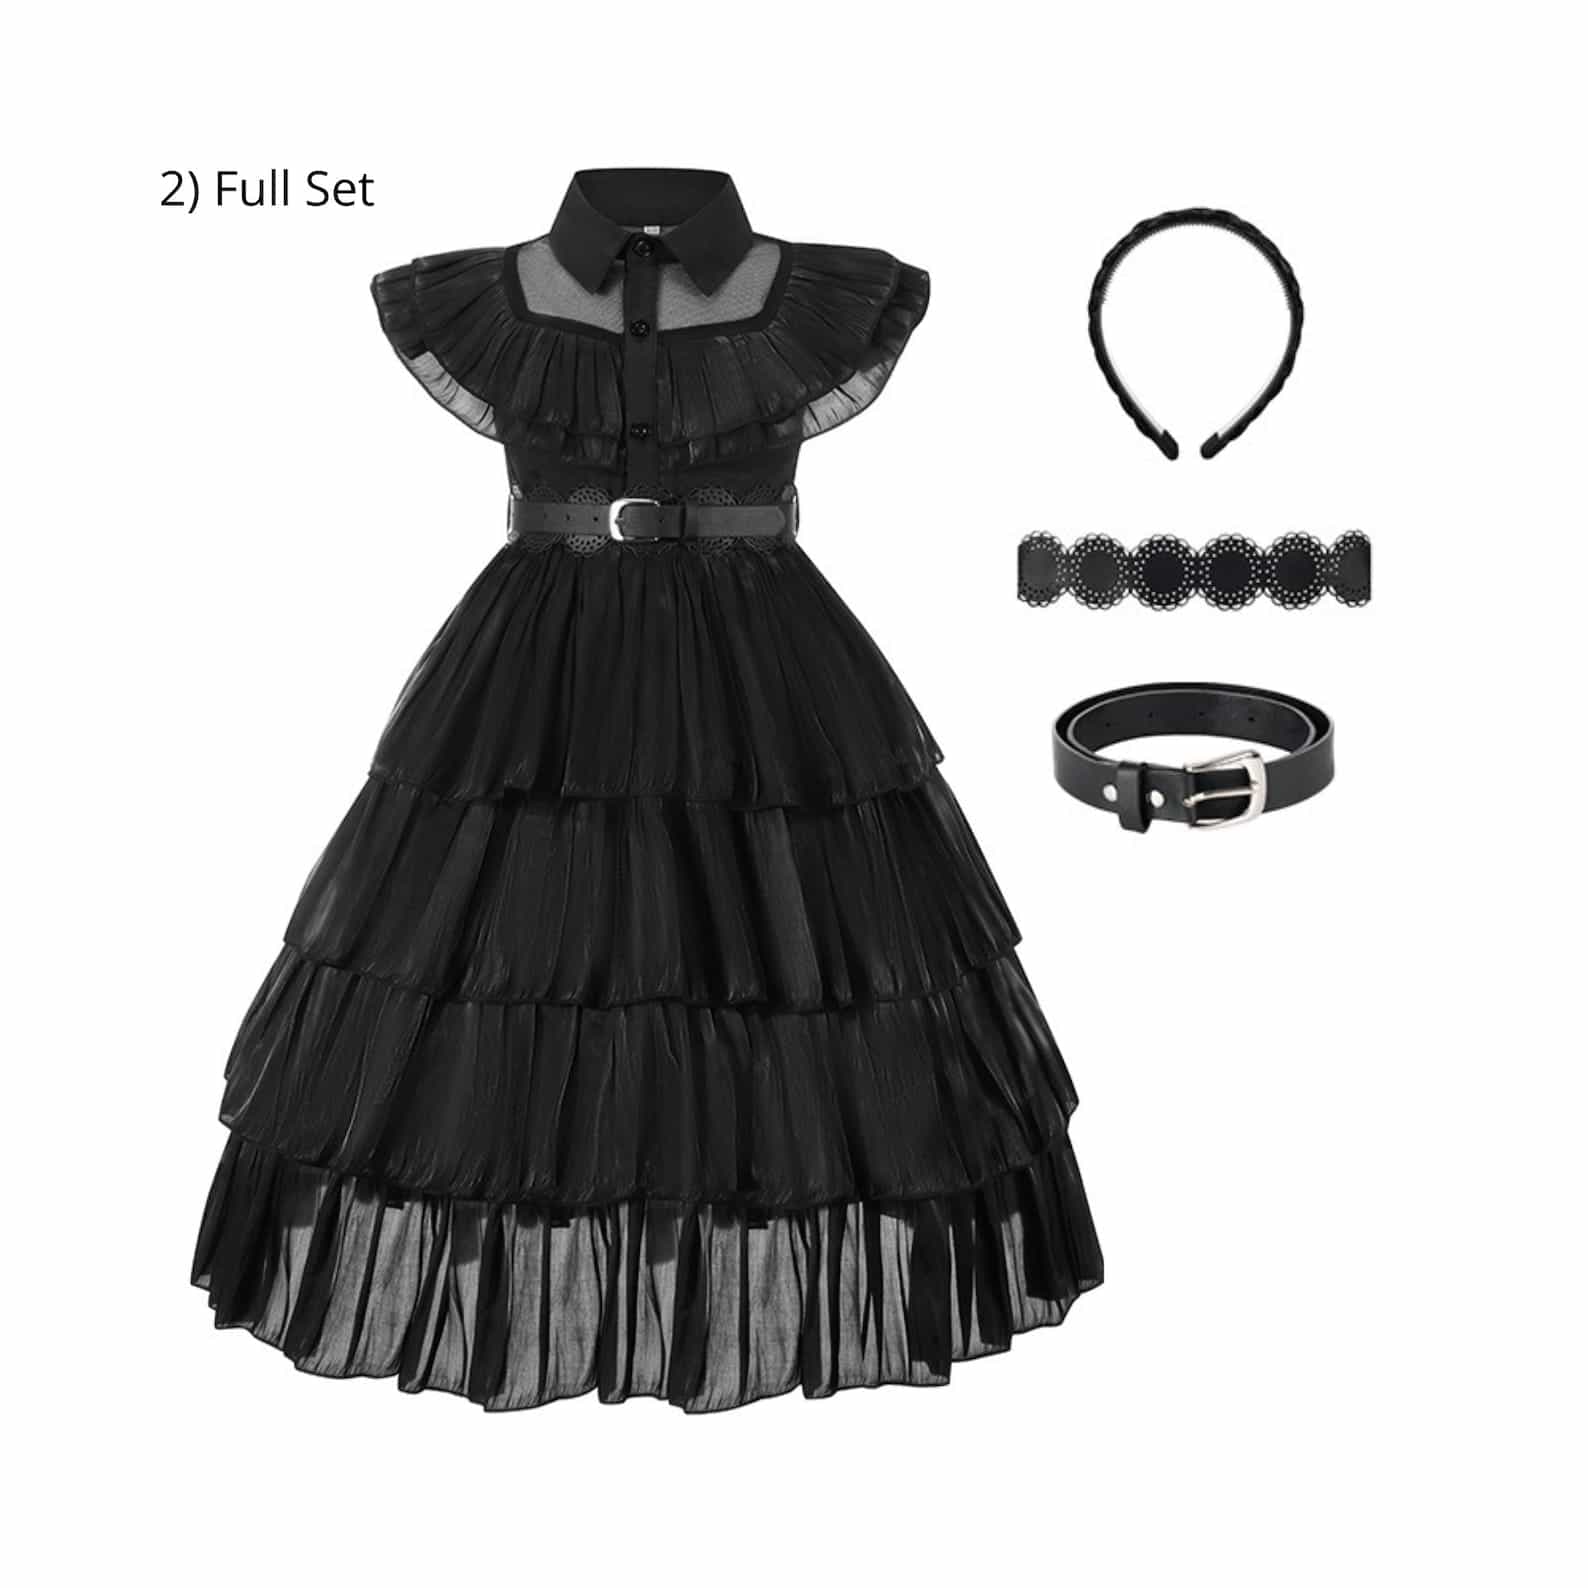 Disney-Inspired Wednesday Addams Dress, party costume, and Halloween Outfit Full Set